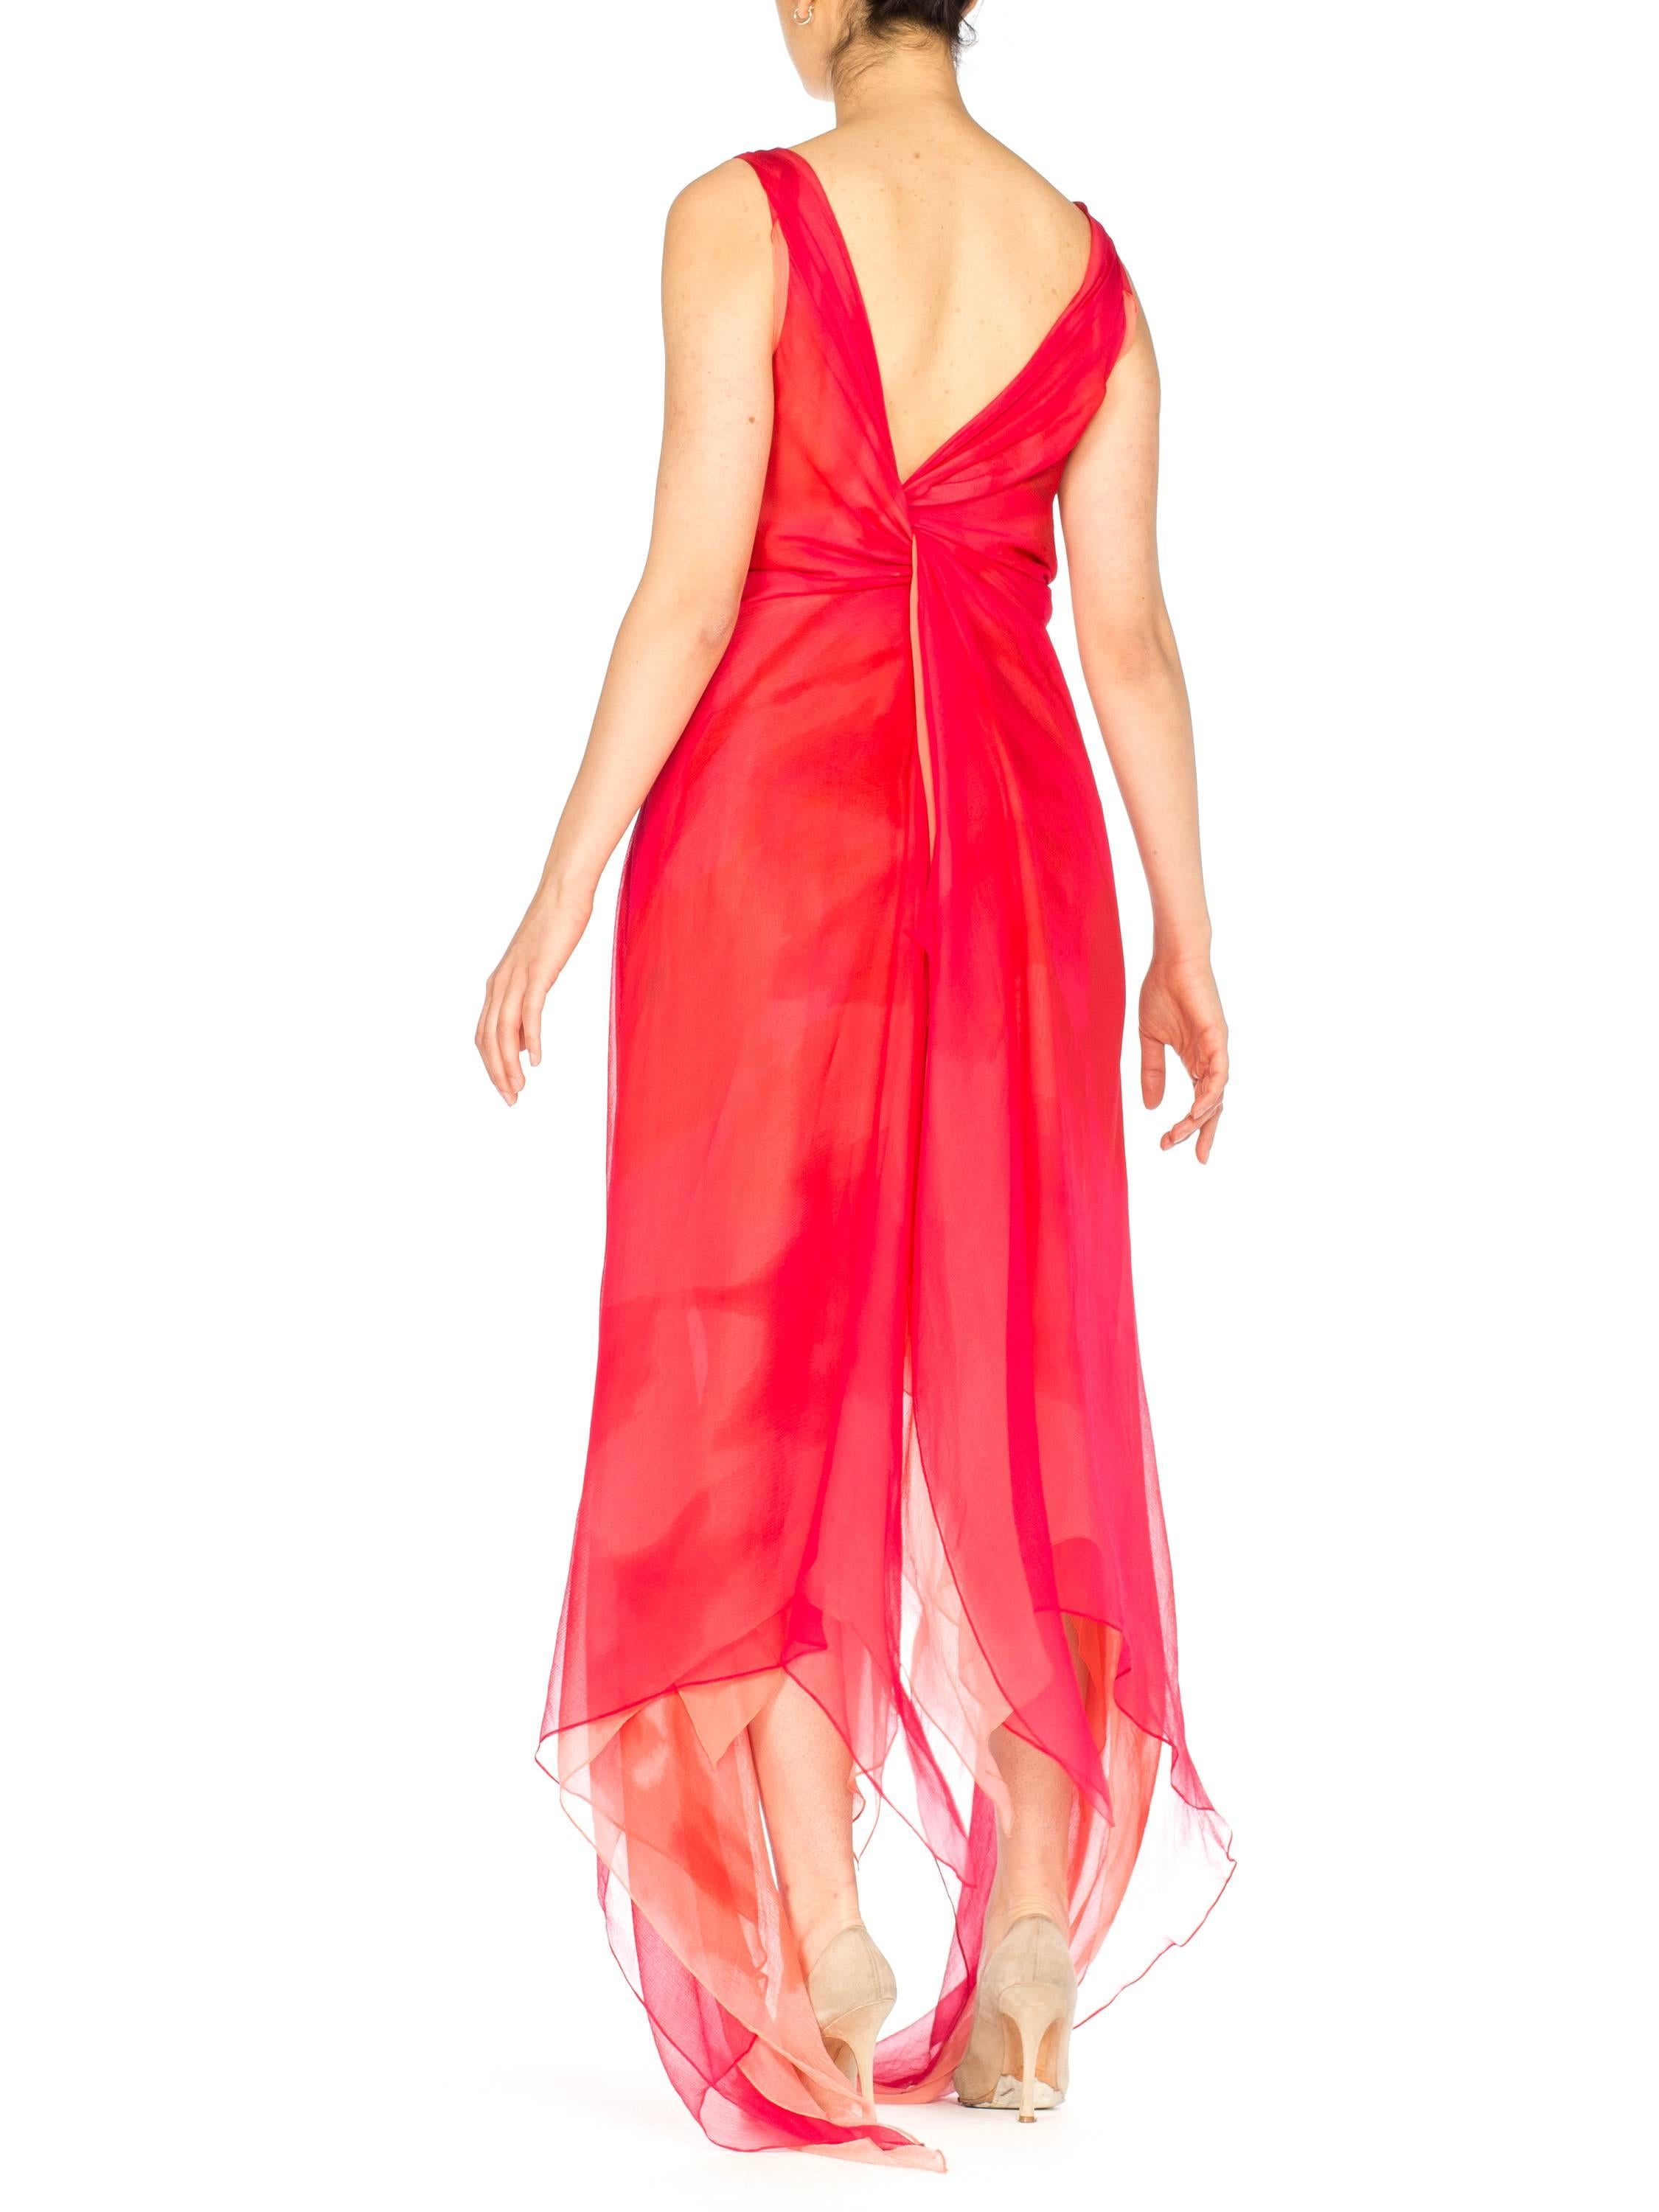 Donna Karan Layers of Red and Pink Chiffon Gown, 1990s  2